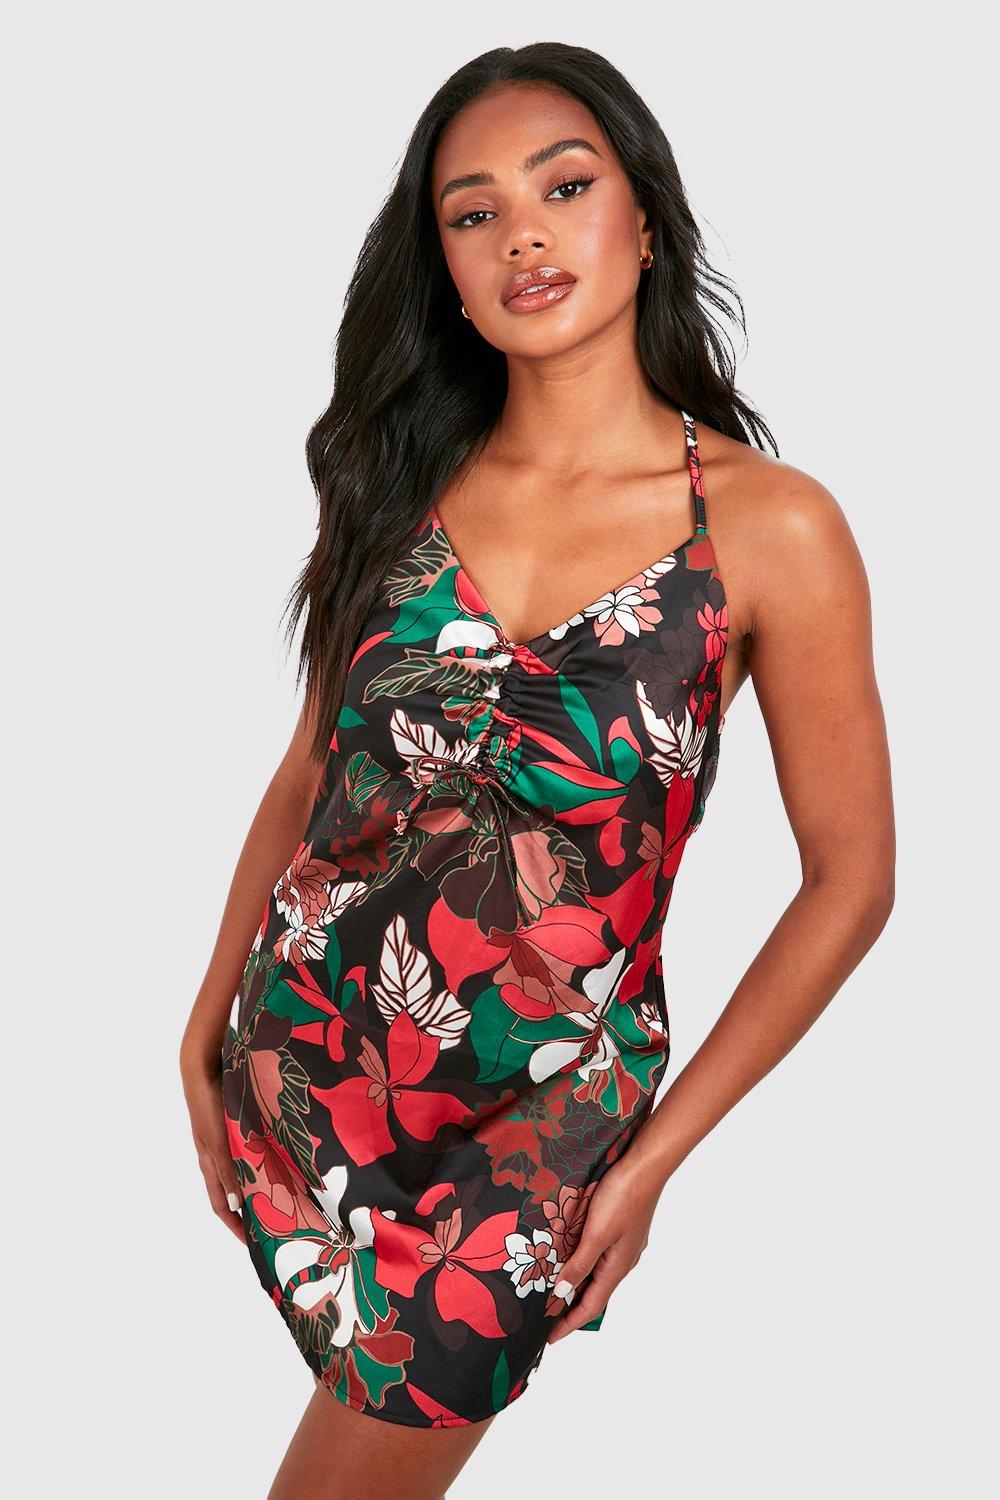 Large Scale Floral Print Strappy Slip Dress